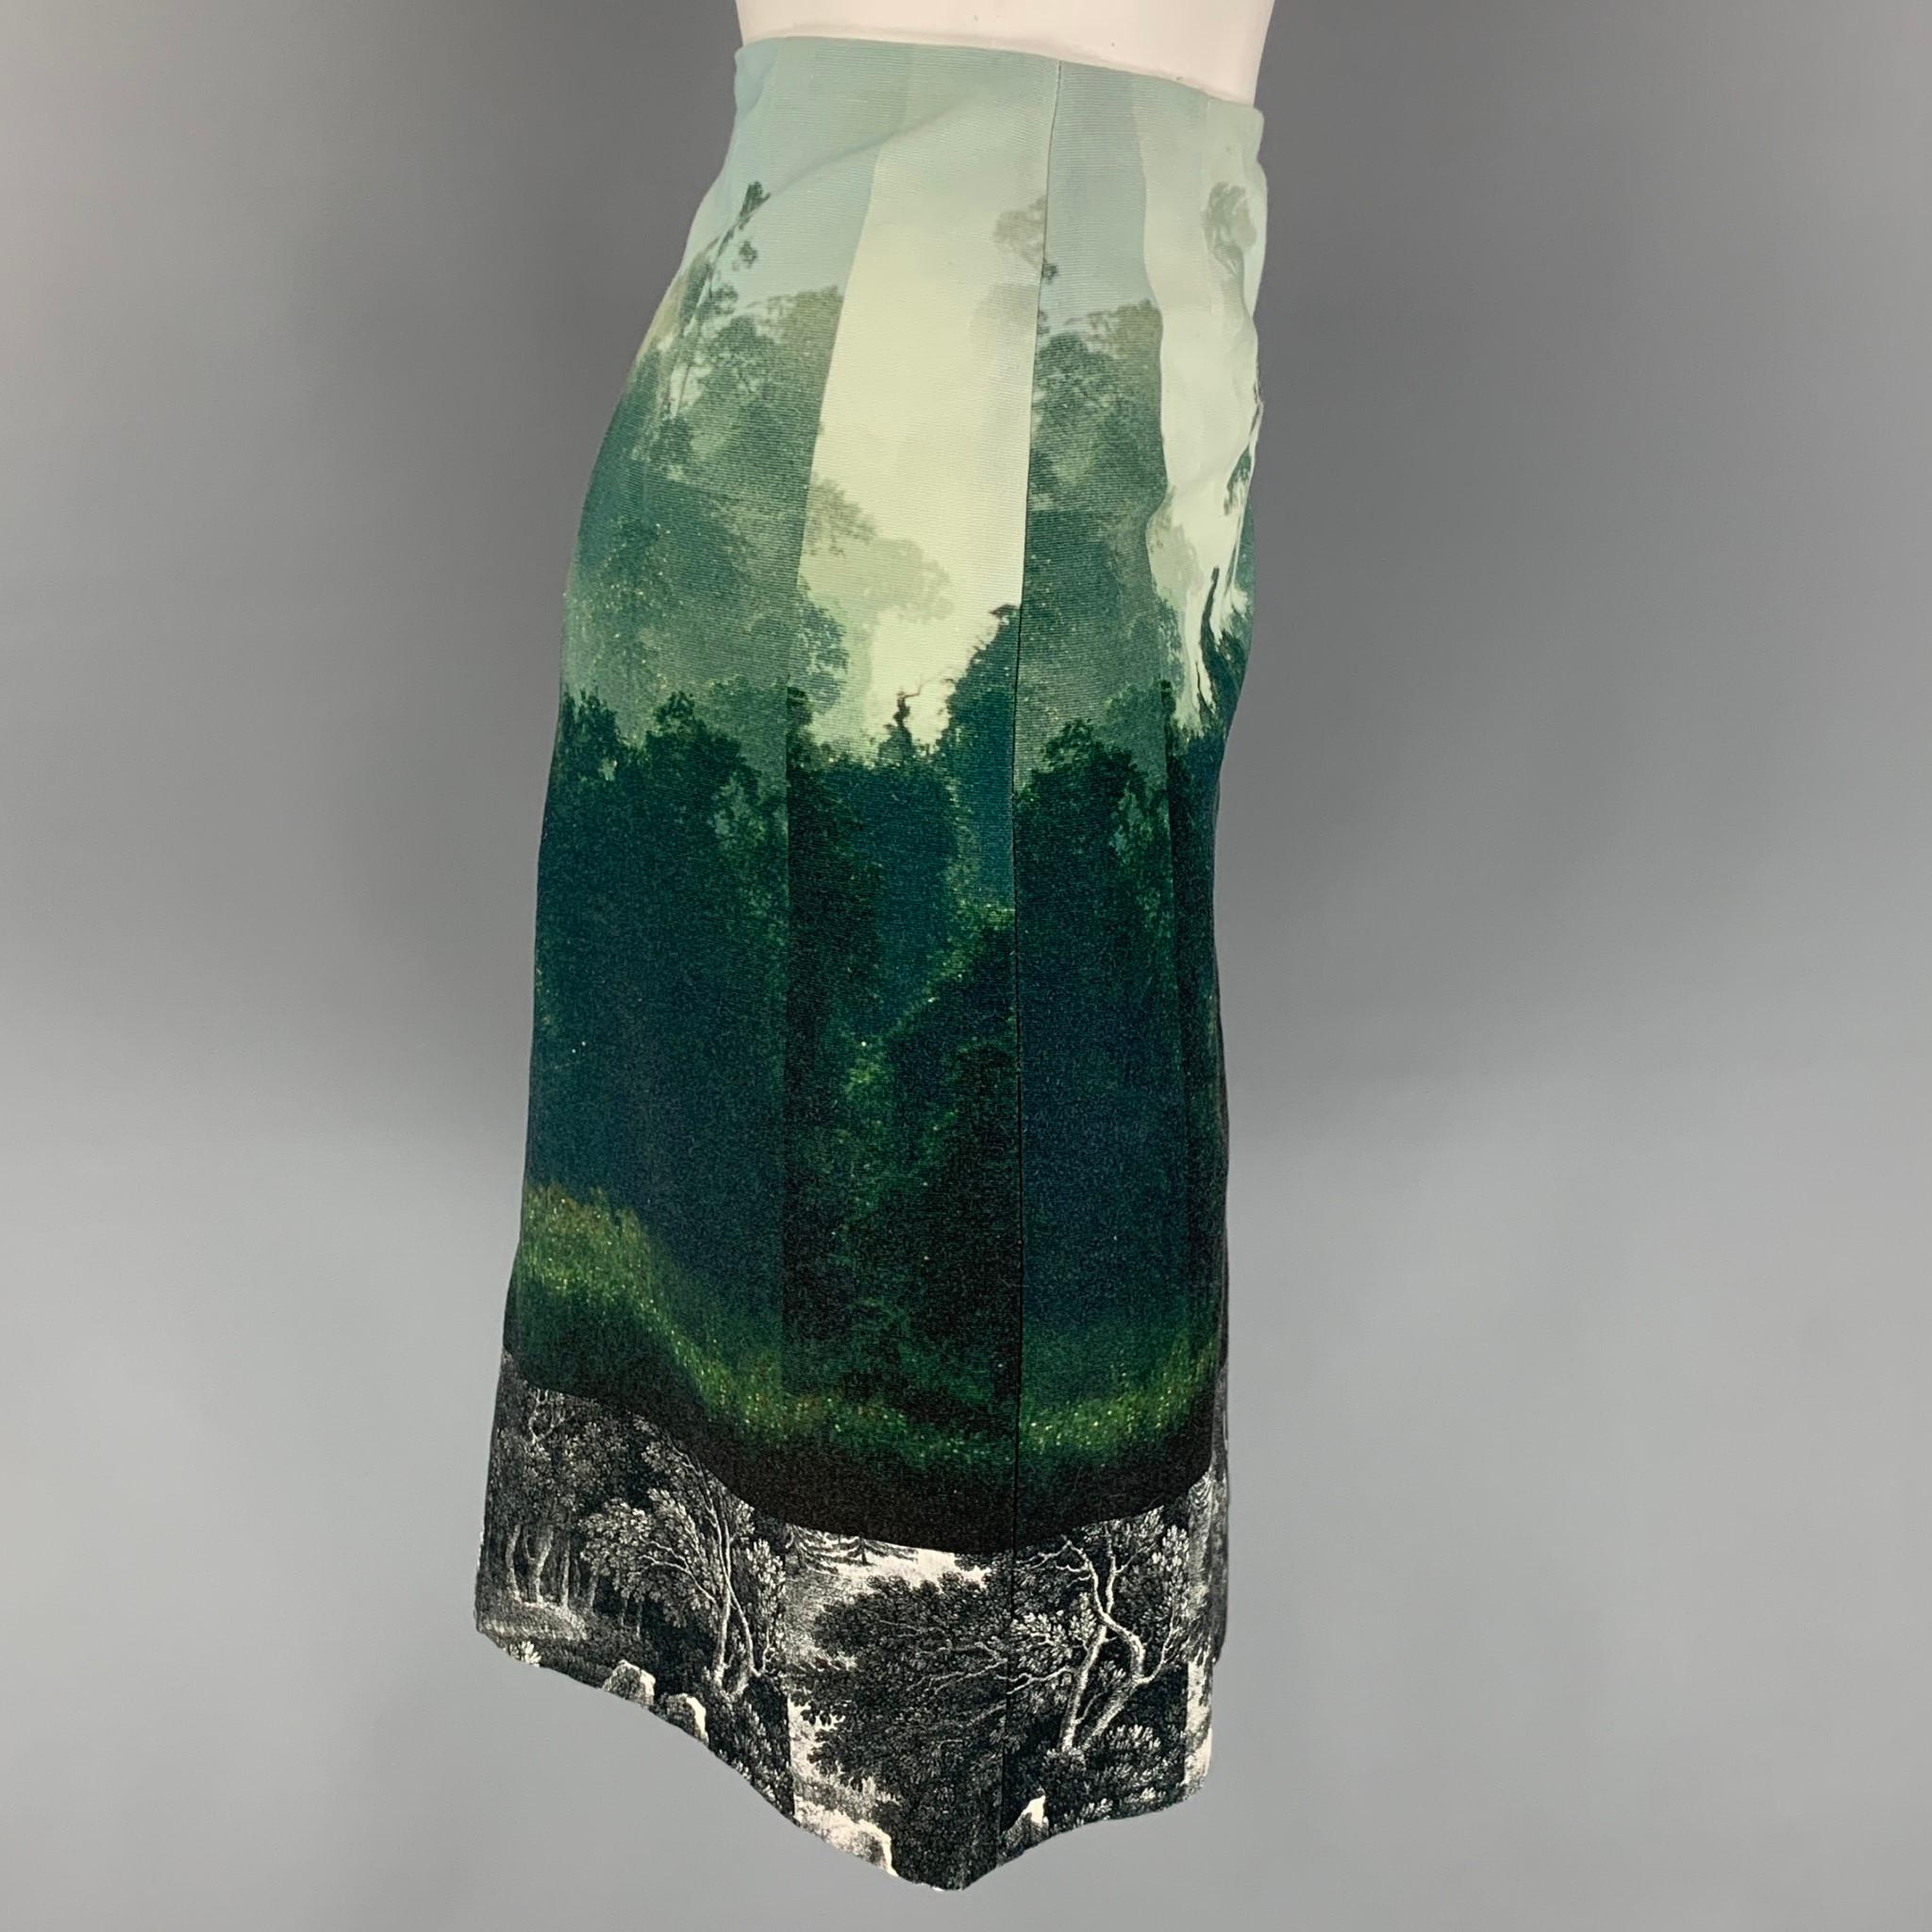 DRIES VAN NOTEN skirt comes in a green & blue tapestry cotton with a slip liner featuring an a-line style, black & white panel, side slit, and a back zip up closure. 

Very Good Pre-Owned Condition.
Marked: 38

Measurements:

Waist: 30 in.
Hip: 36